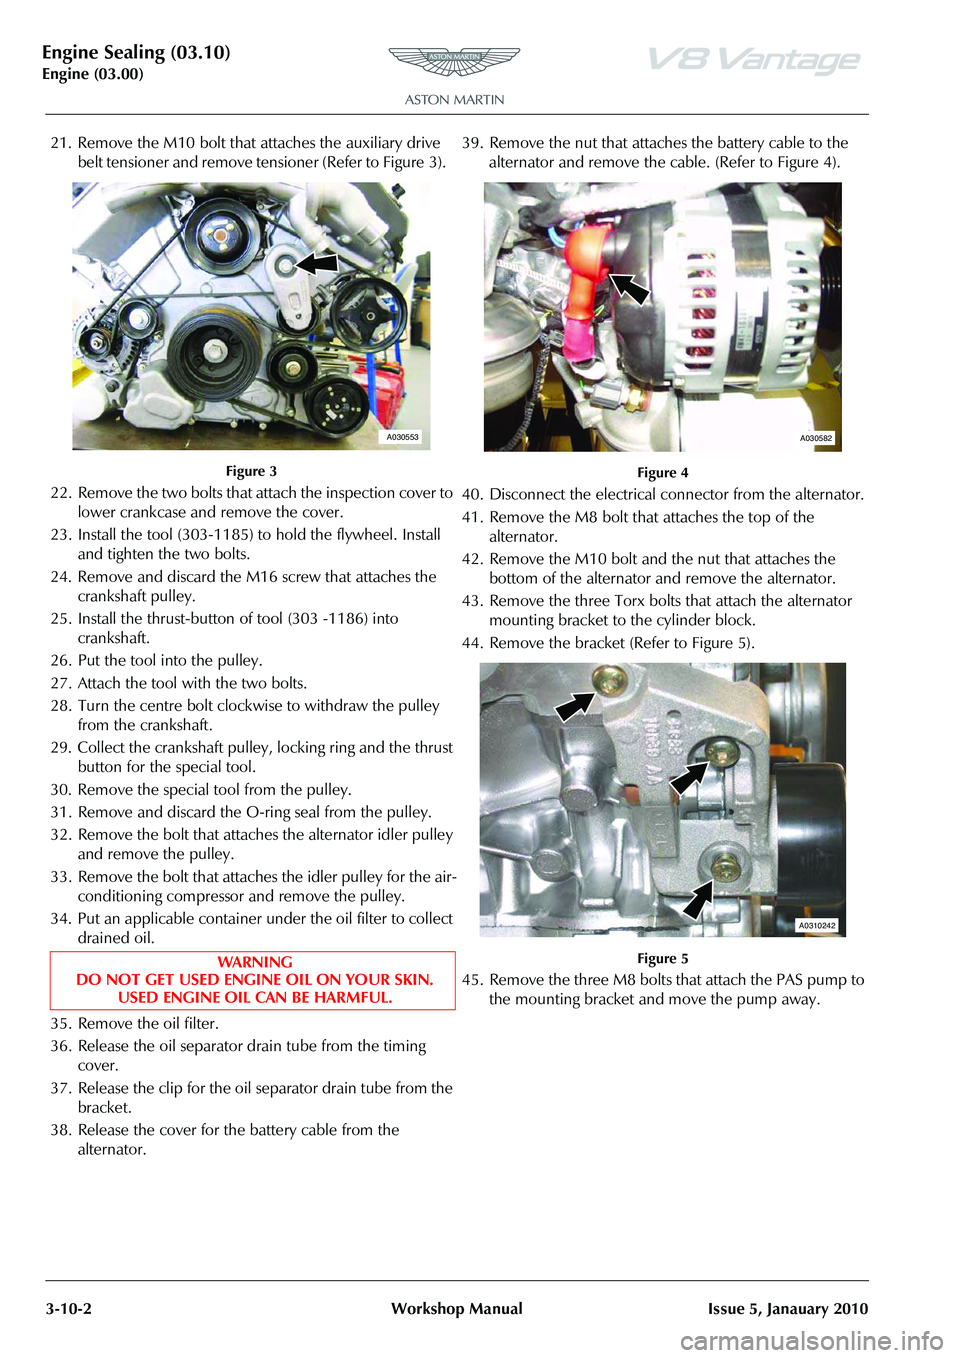 ASTON MARTIN V8 VANTAGE 2010  Workshop Manual Engine Sealing (03.10)
Engine (03.00)3-10-2 Workshop Manual Issue 5, Janauary 2010
21. Remove the M10 bolt that attaches the auxiliary drive  belt tensioner and remove tensioner (Refer to Figure  3). 